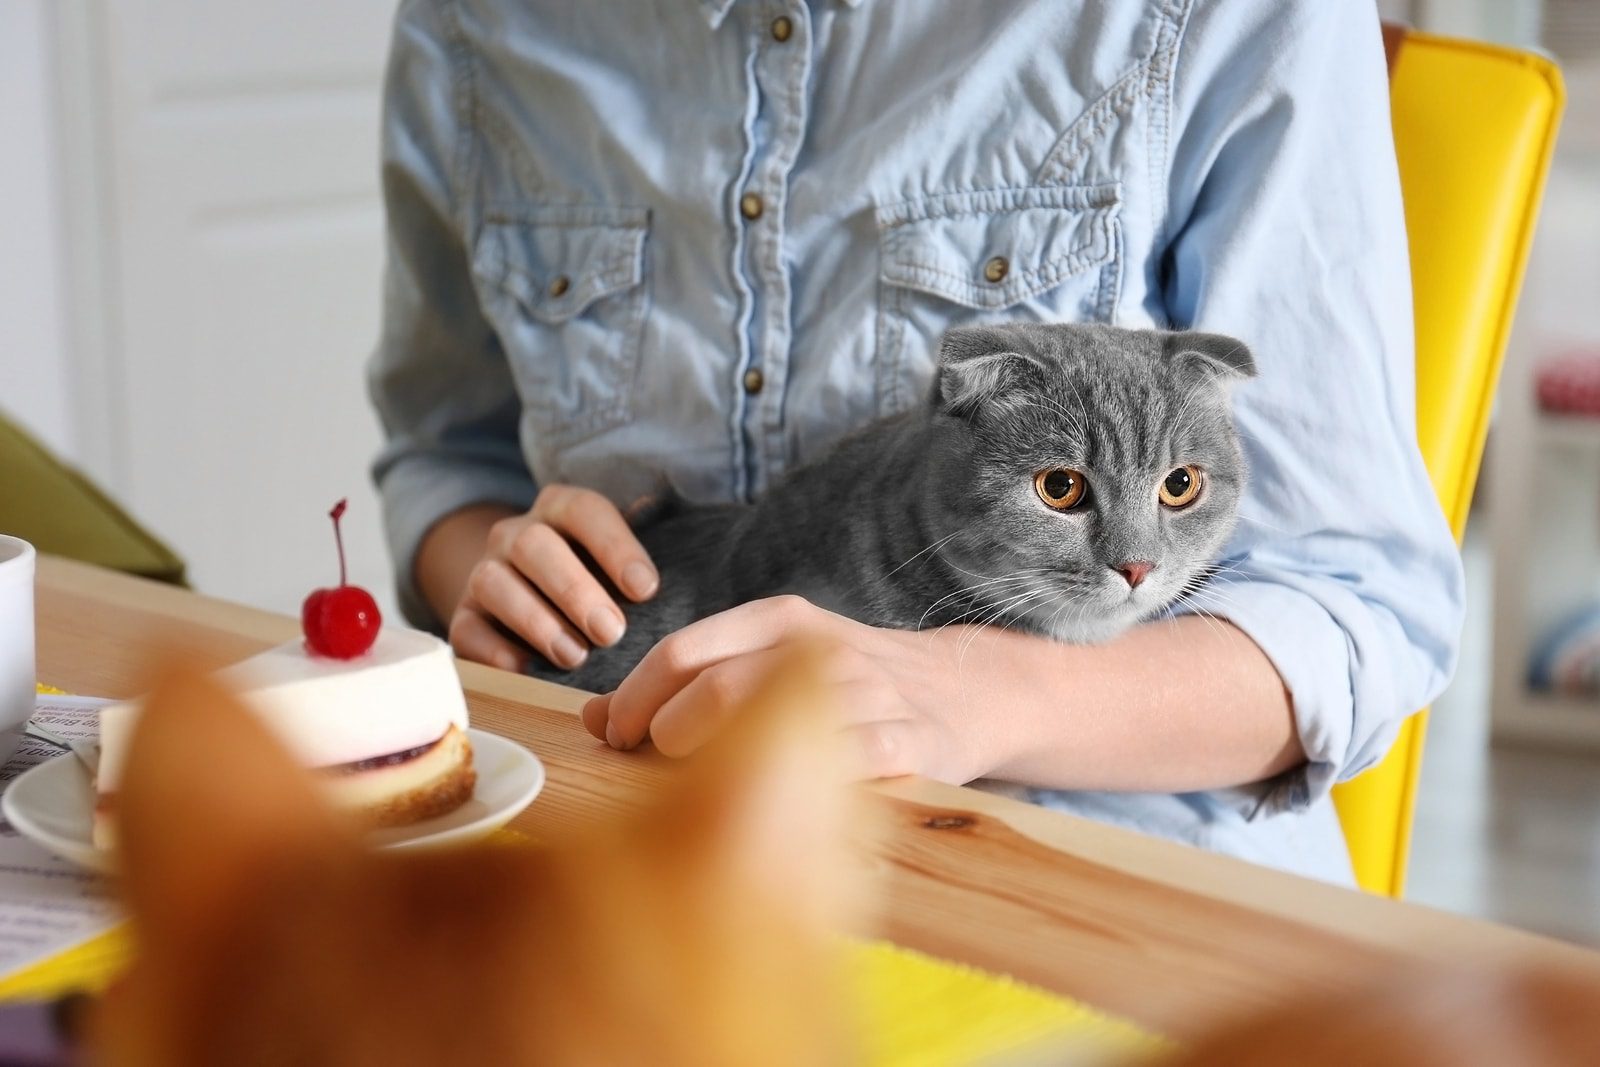 Cat cafe: a place where cat lovers and coffee lovers meet